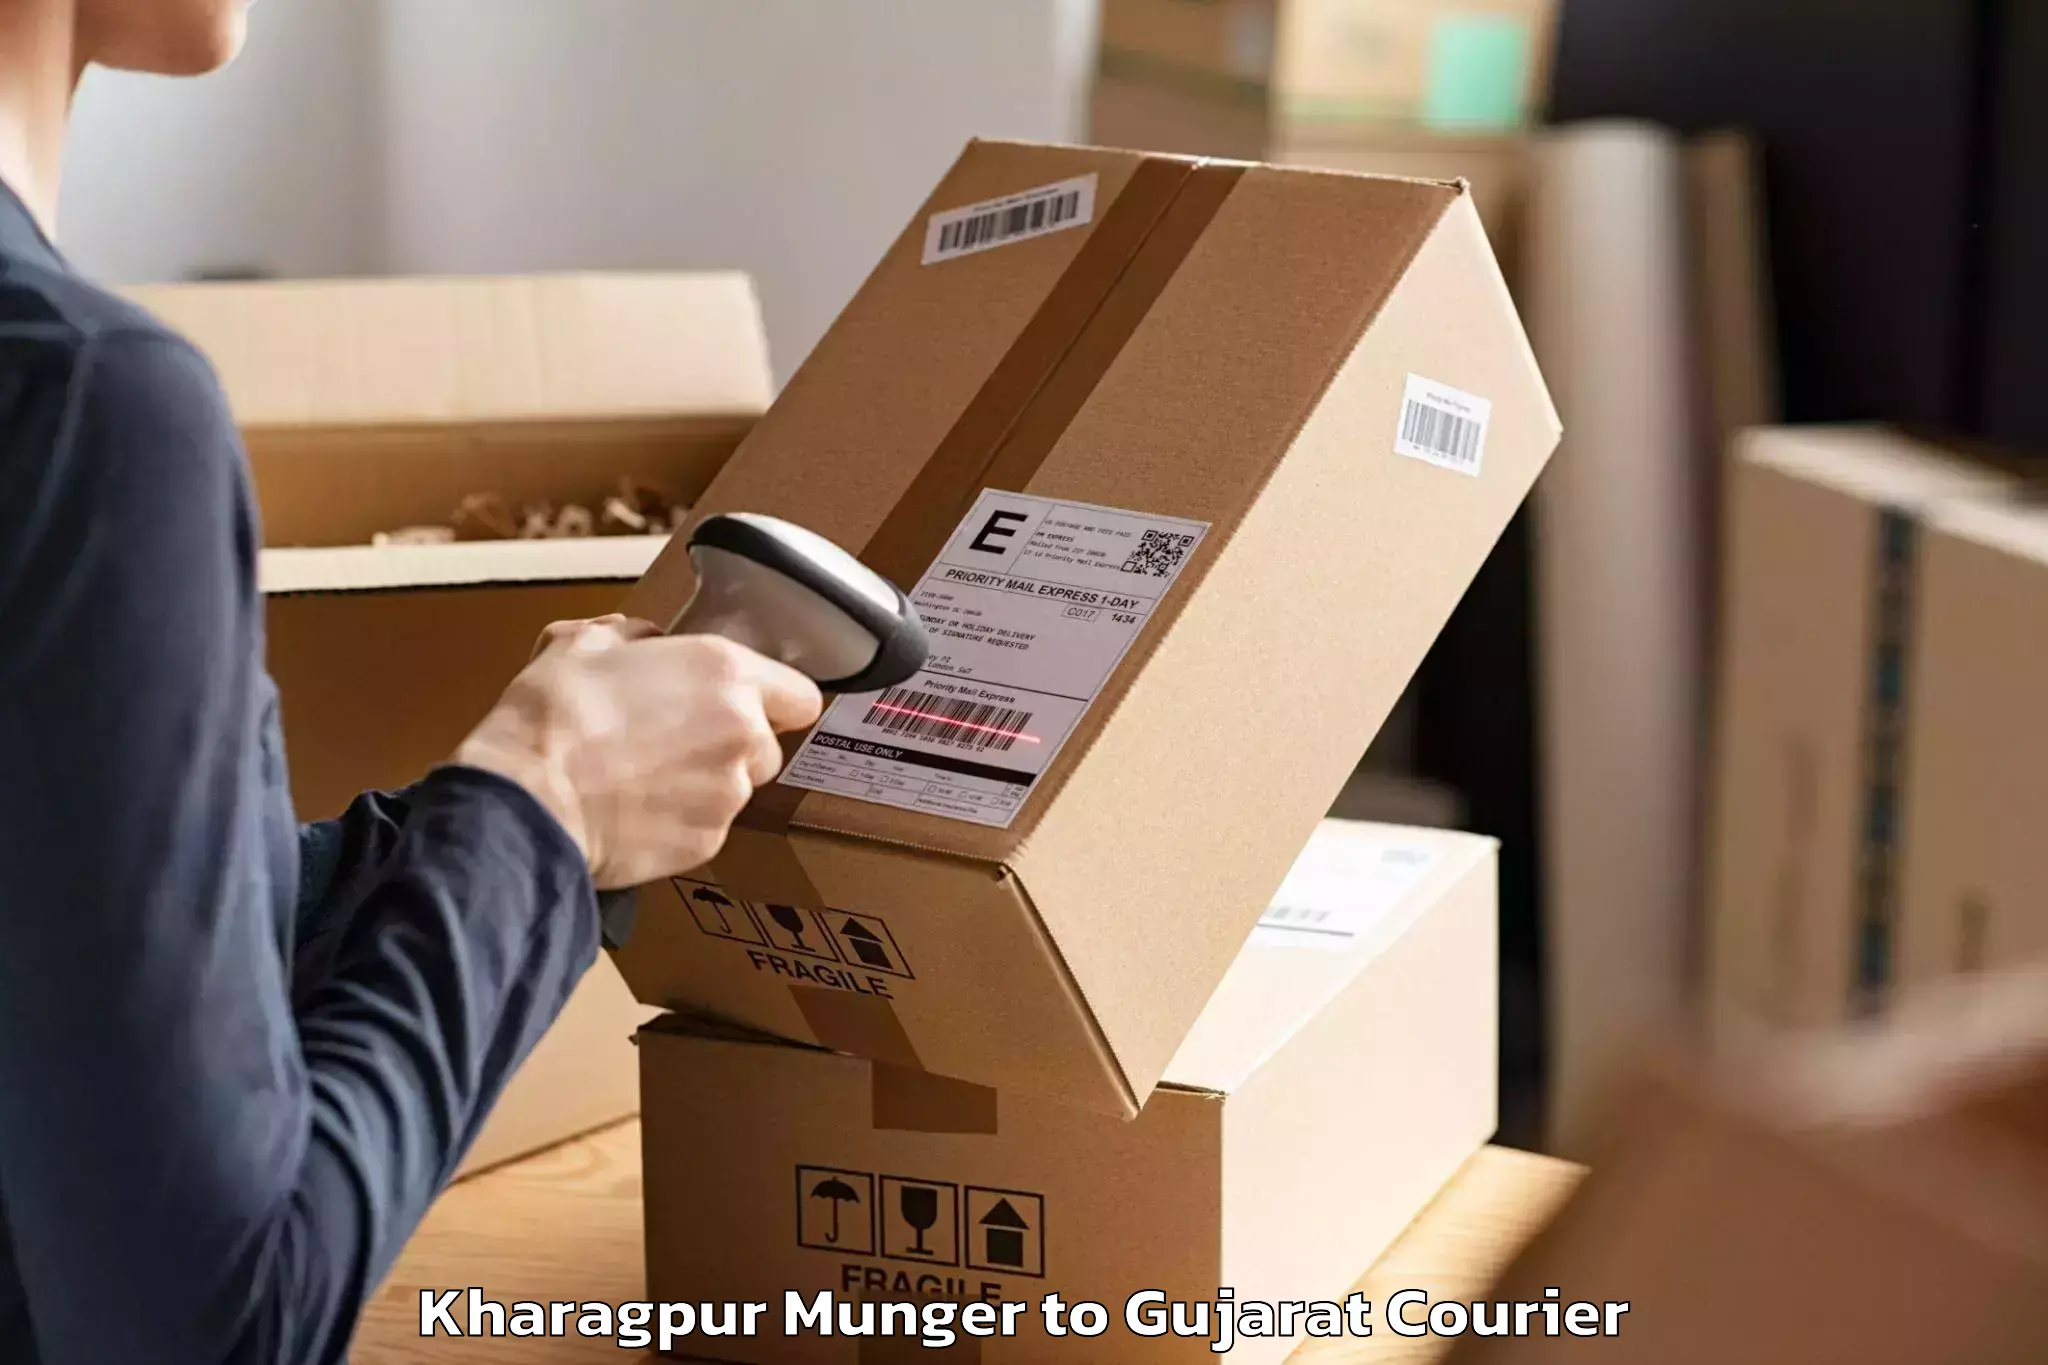 Trusted relocation experts Kharagpur Munger to Valsad